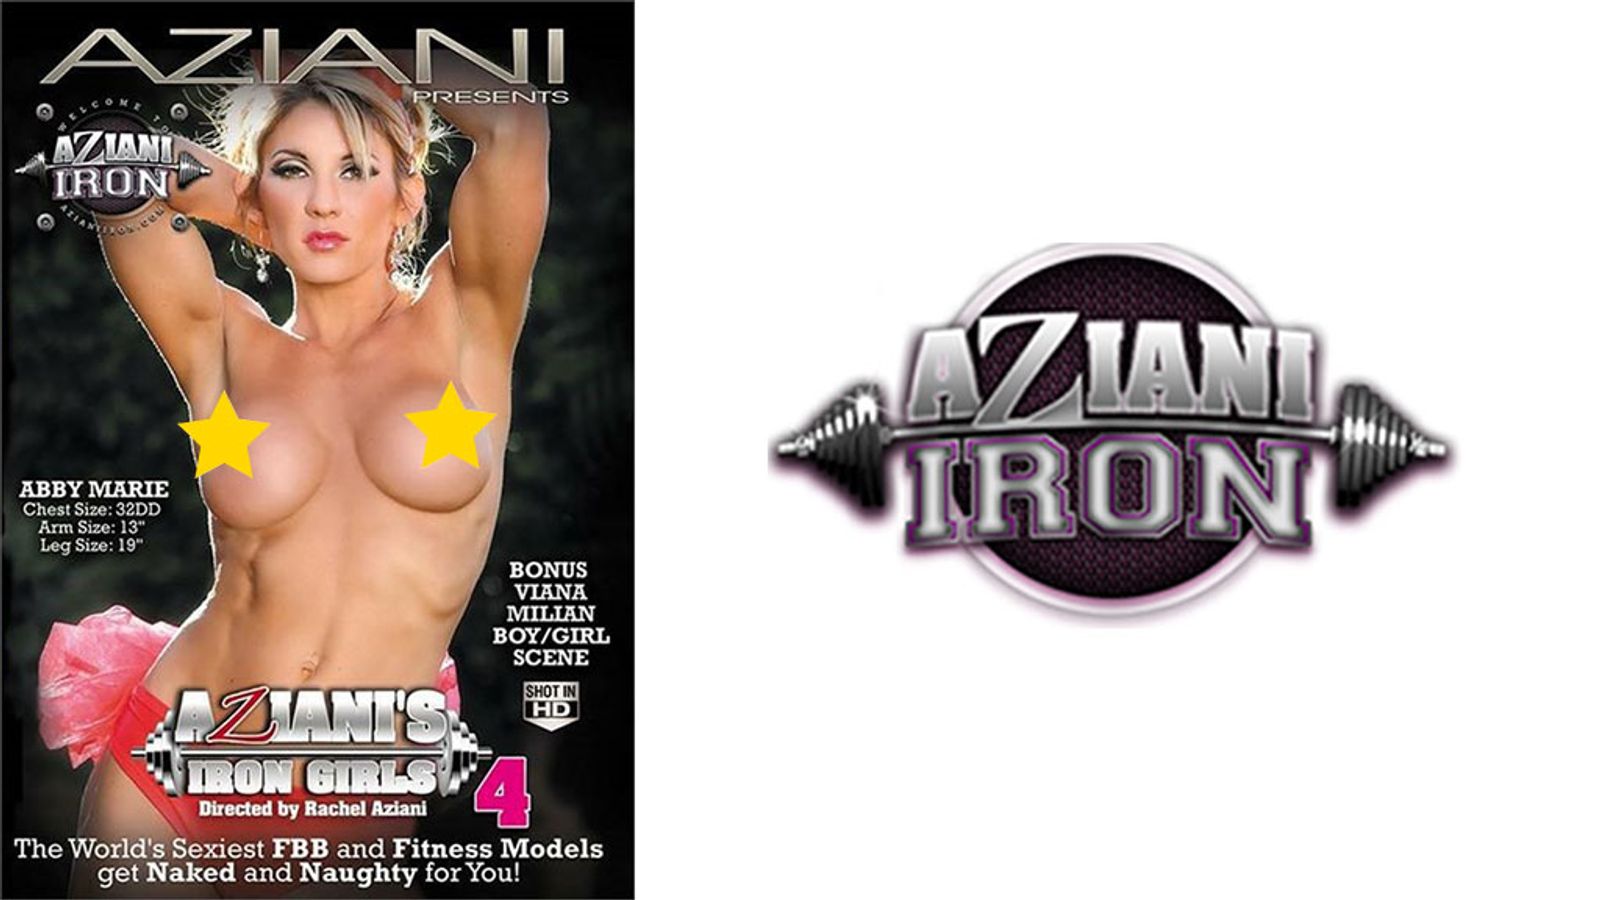 'Aziani's Iron Girls 4' Shows Muscled Beauties At Their Sexiest